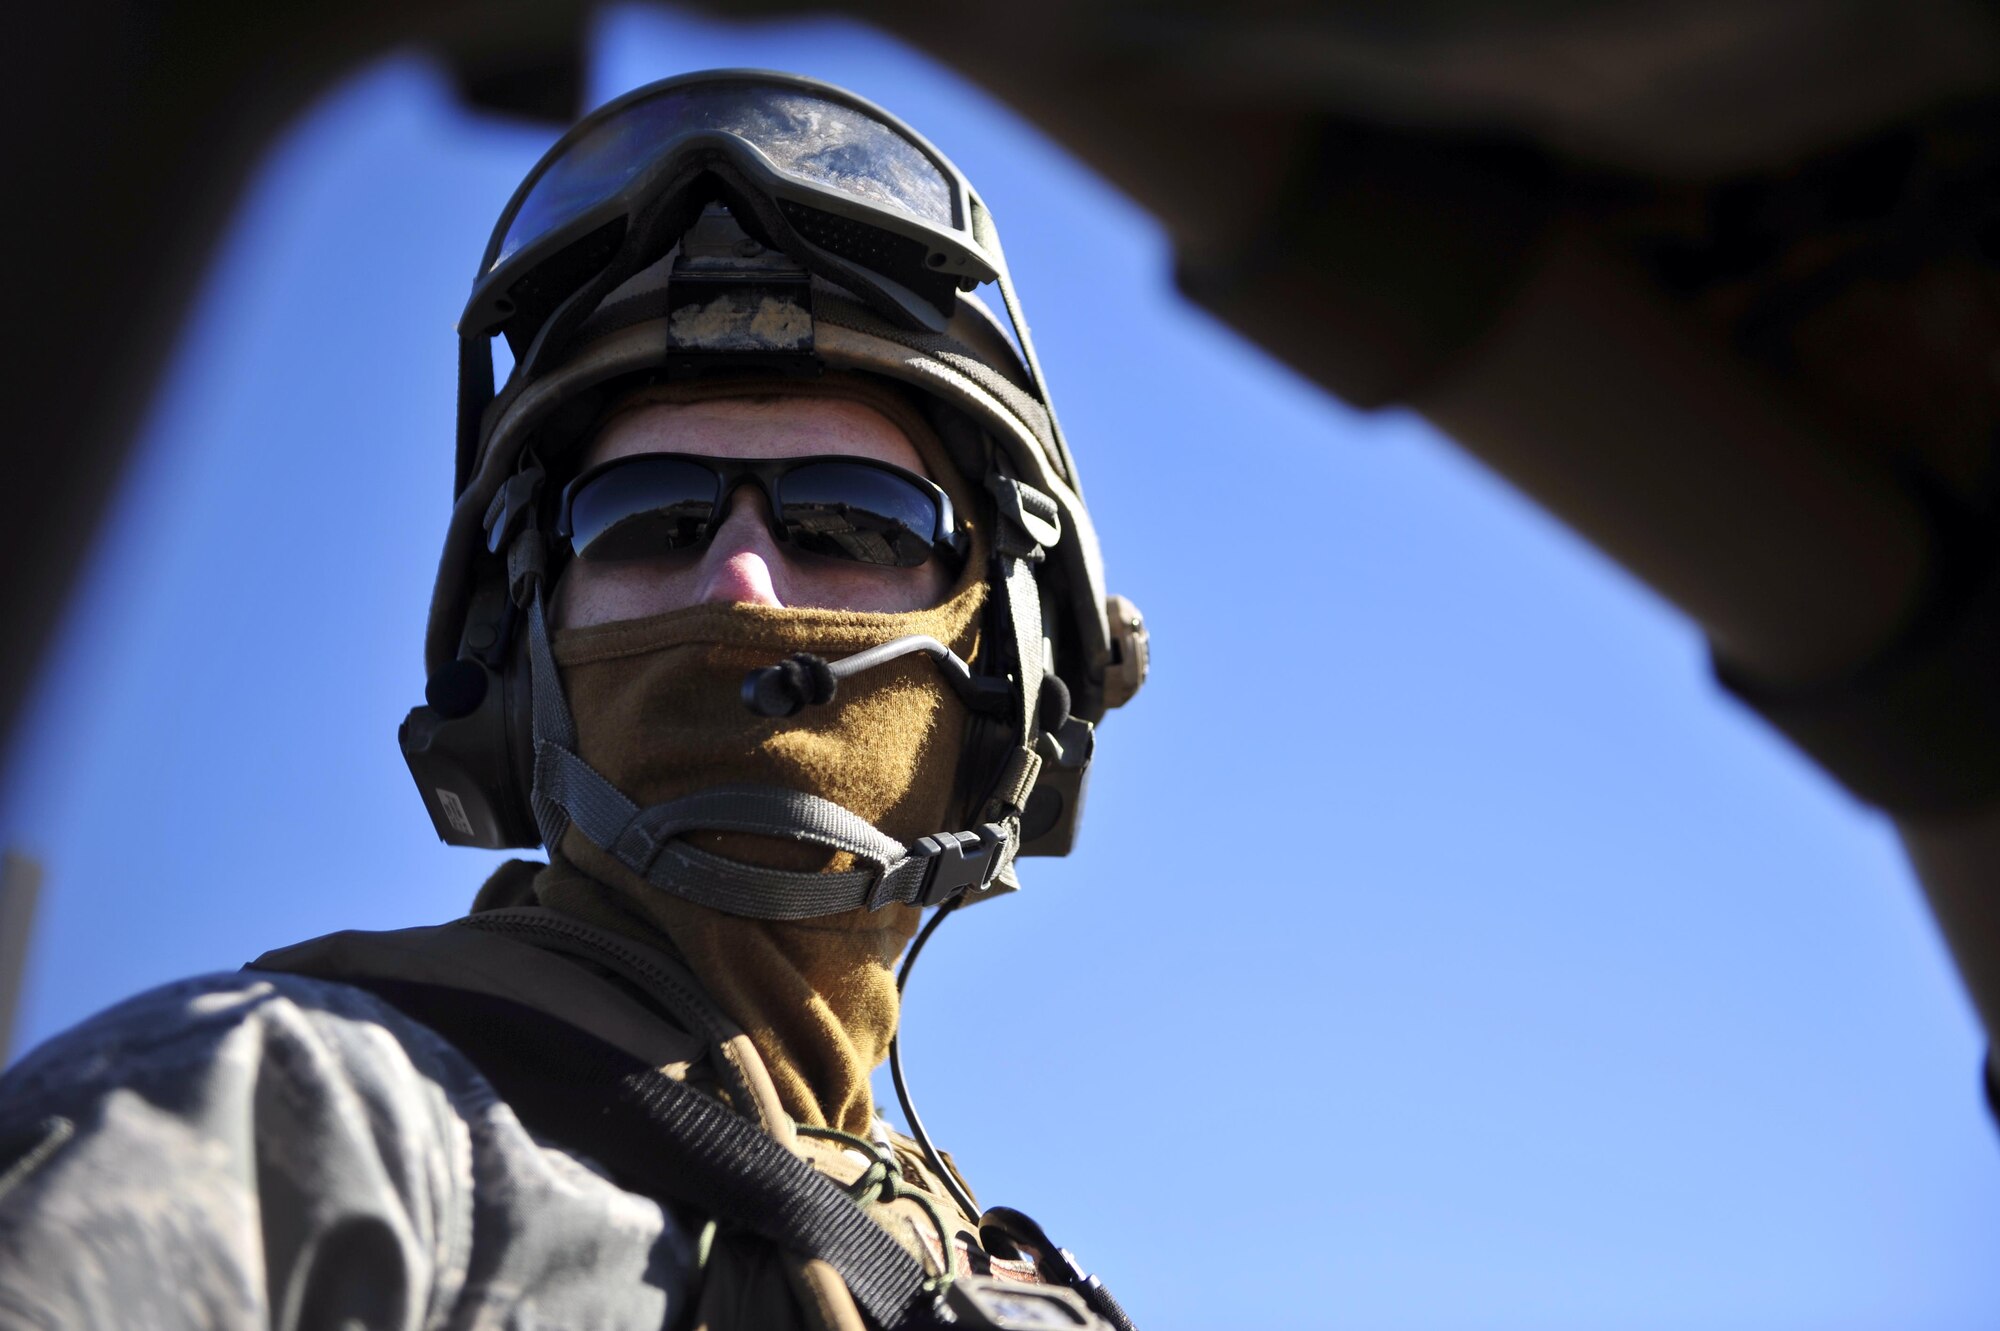 A 1st Special Operations Security Forces Airman scans his area of responsibility for threats during exercise Frigid Archer 2016 at Eglin Range, Fla., Jan. 9, 2016. Frigid Archer tested 1st Special Operations Wing Air Commandos’ expertise through a myriad of operational and support requirements. (U.S. Air Force photo by Staff. Sgt. Tyler Placie)